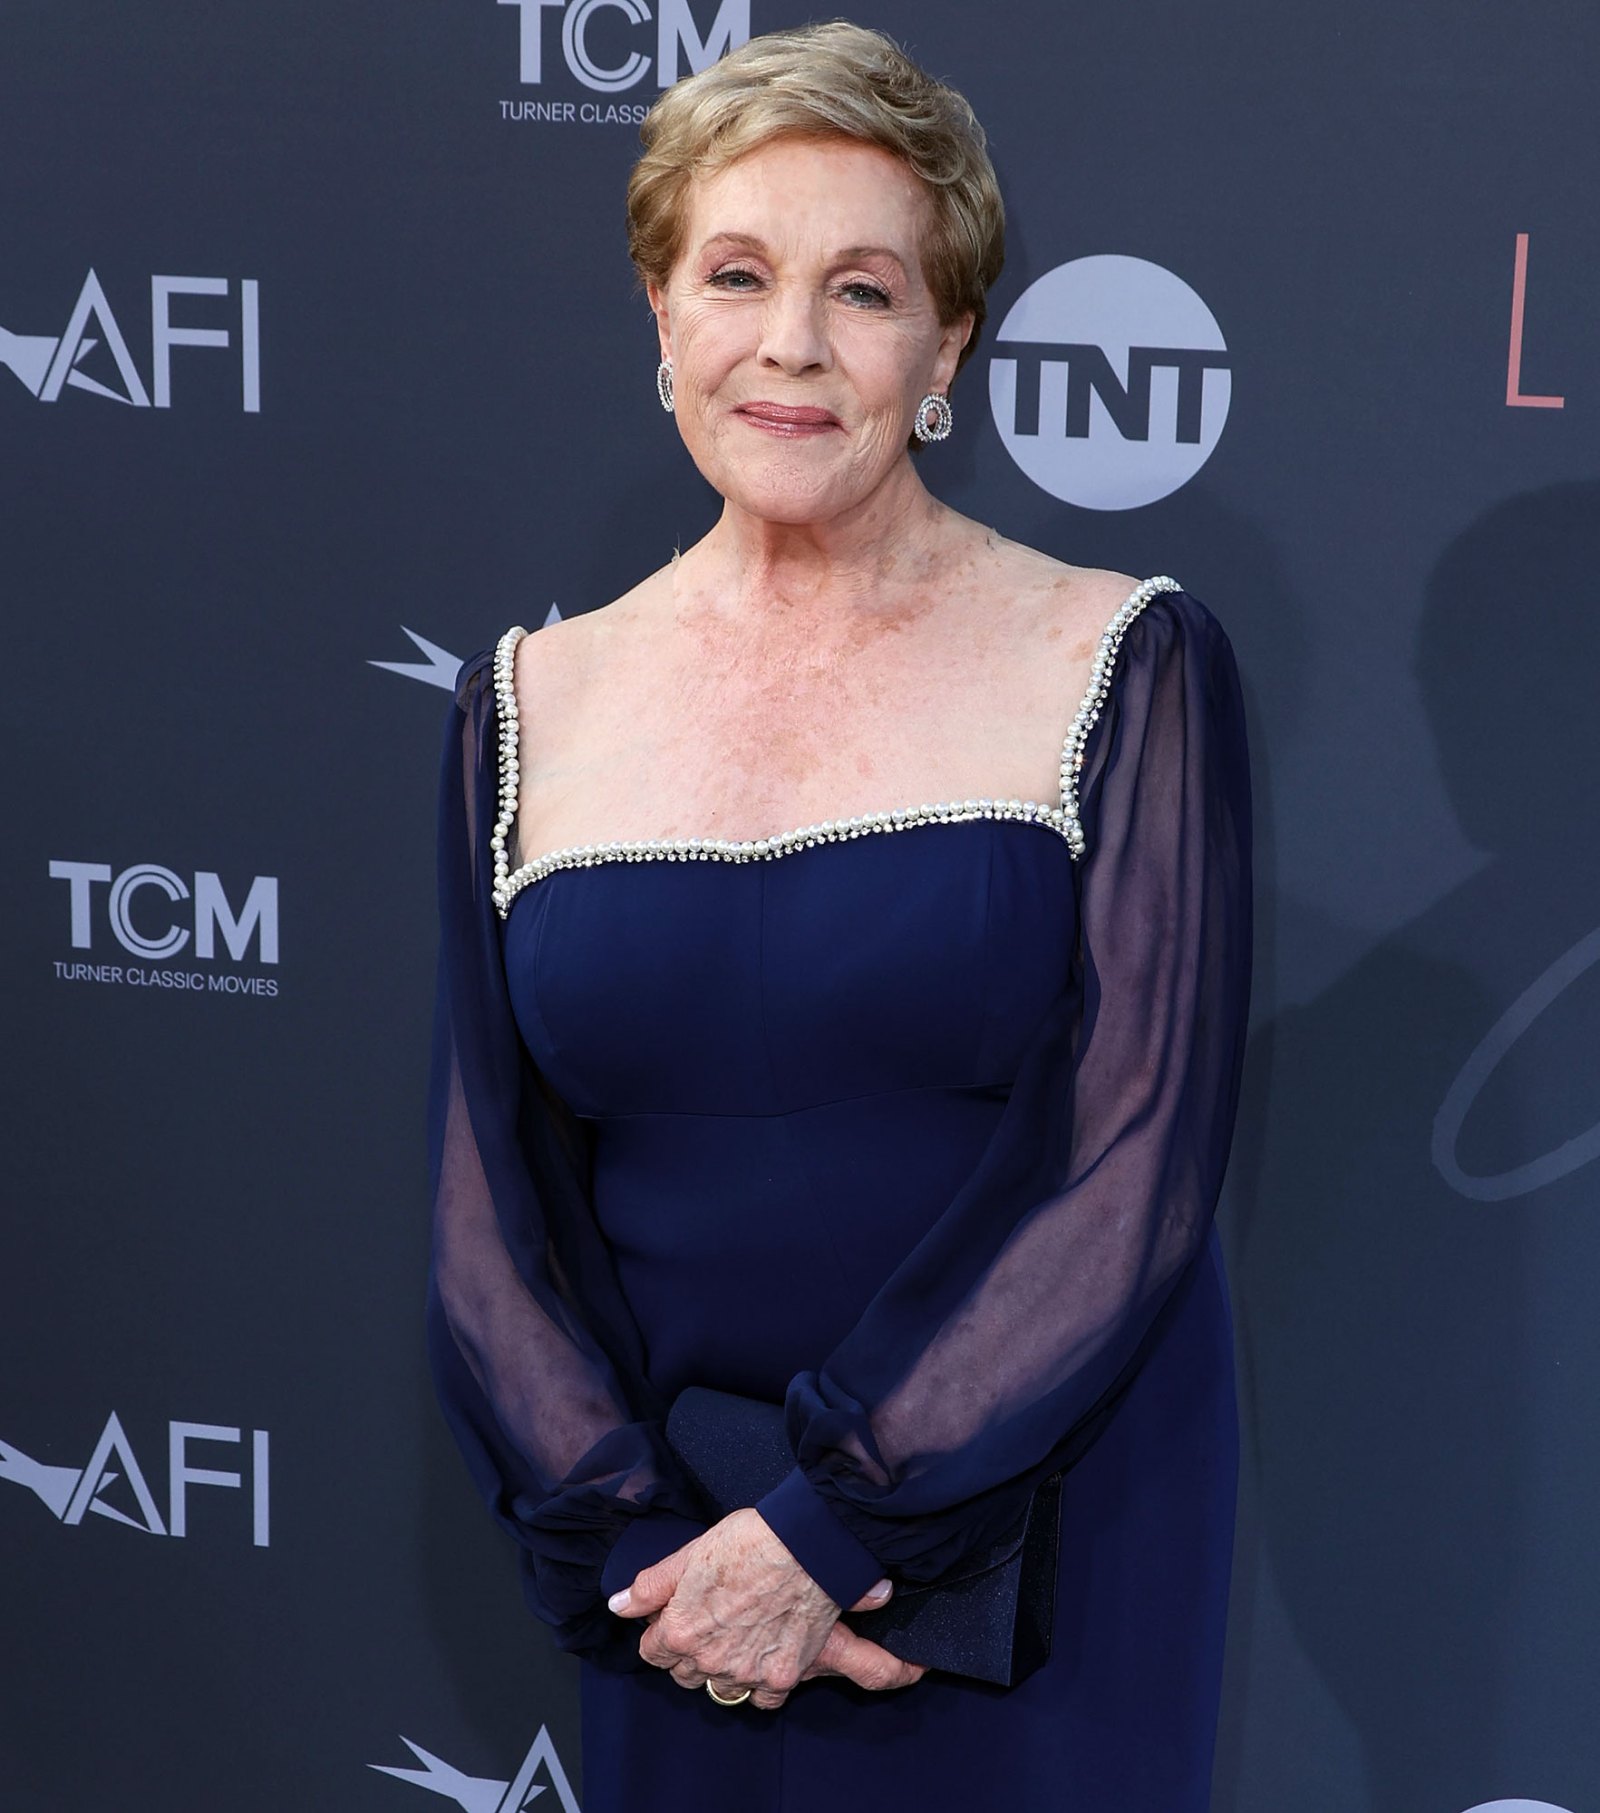 Sound of Music and Mary Poppins Star Julie Andrews Dies at Age TK Stars Honor the Legendary Actress